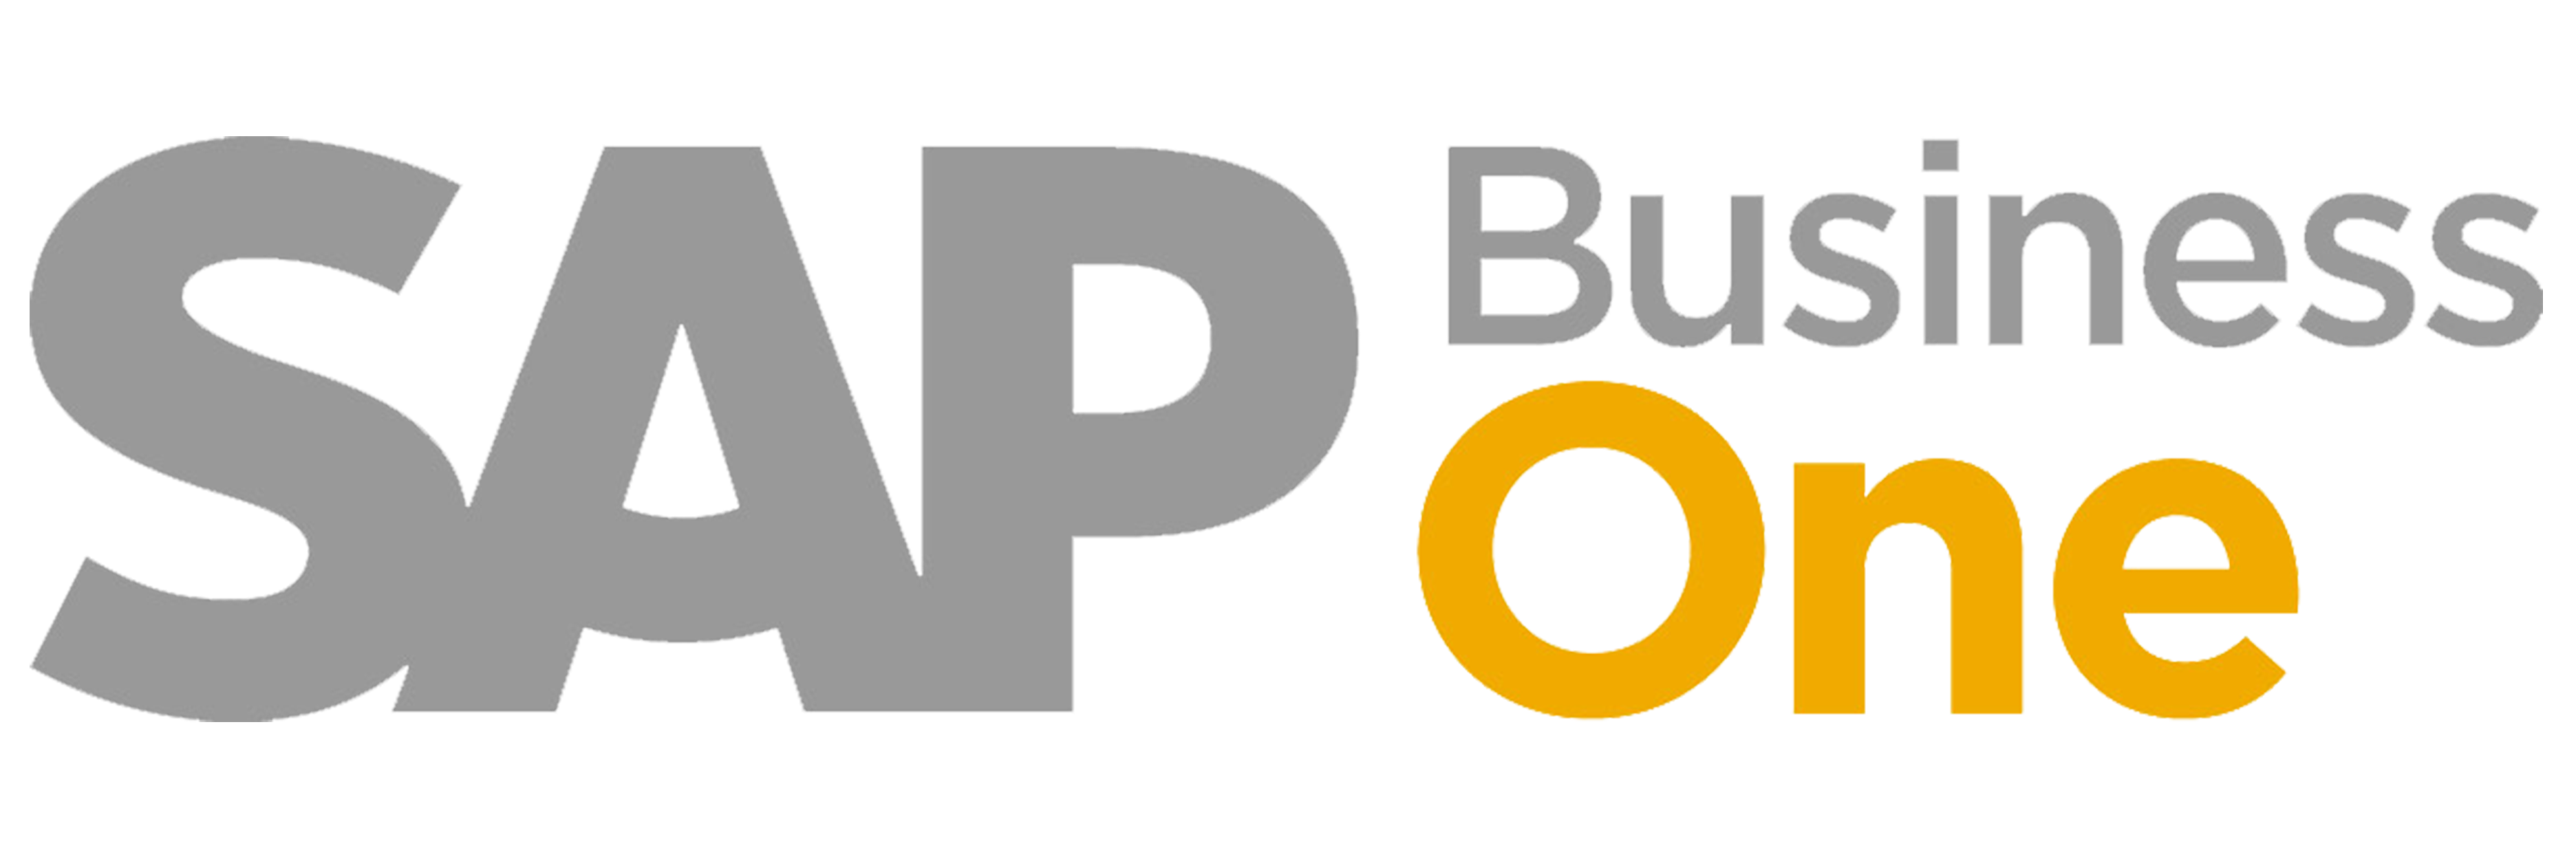 sap-business-one-logo.png